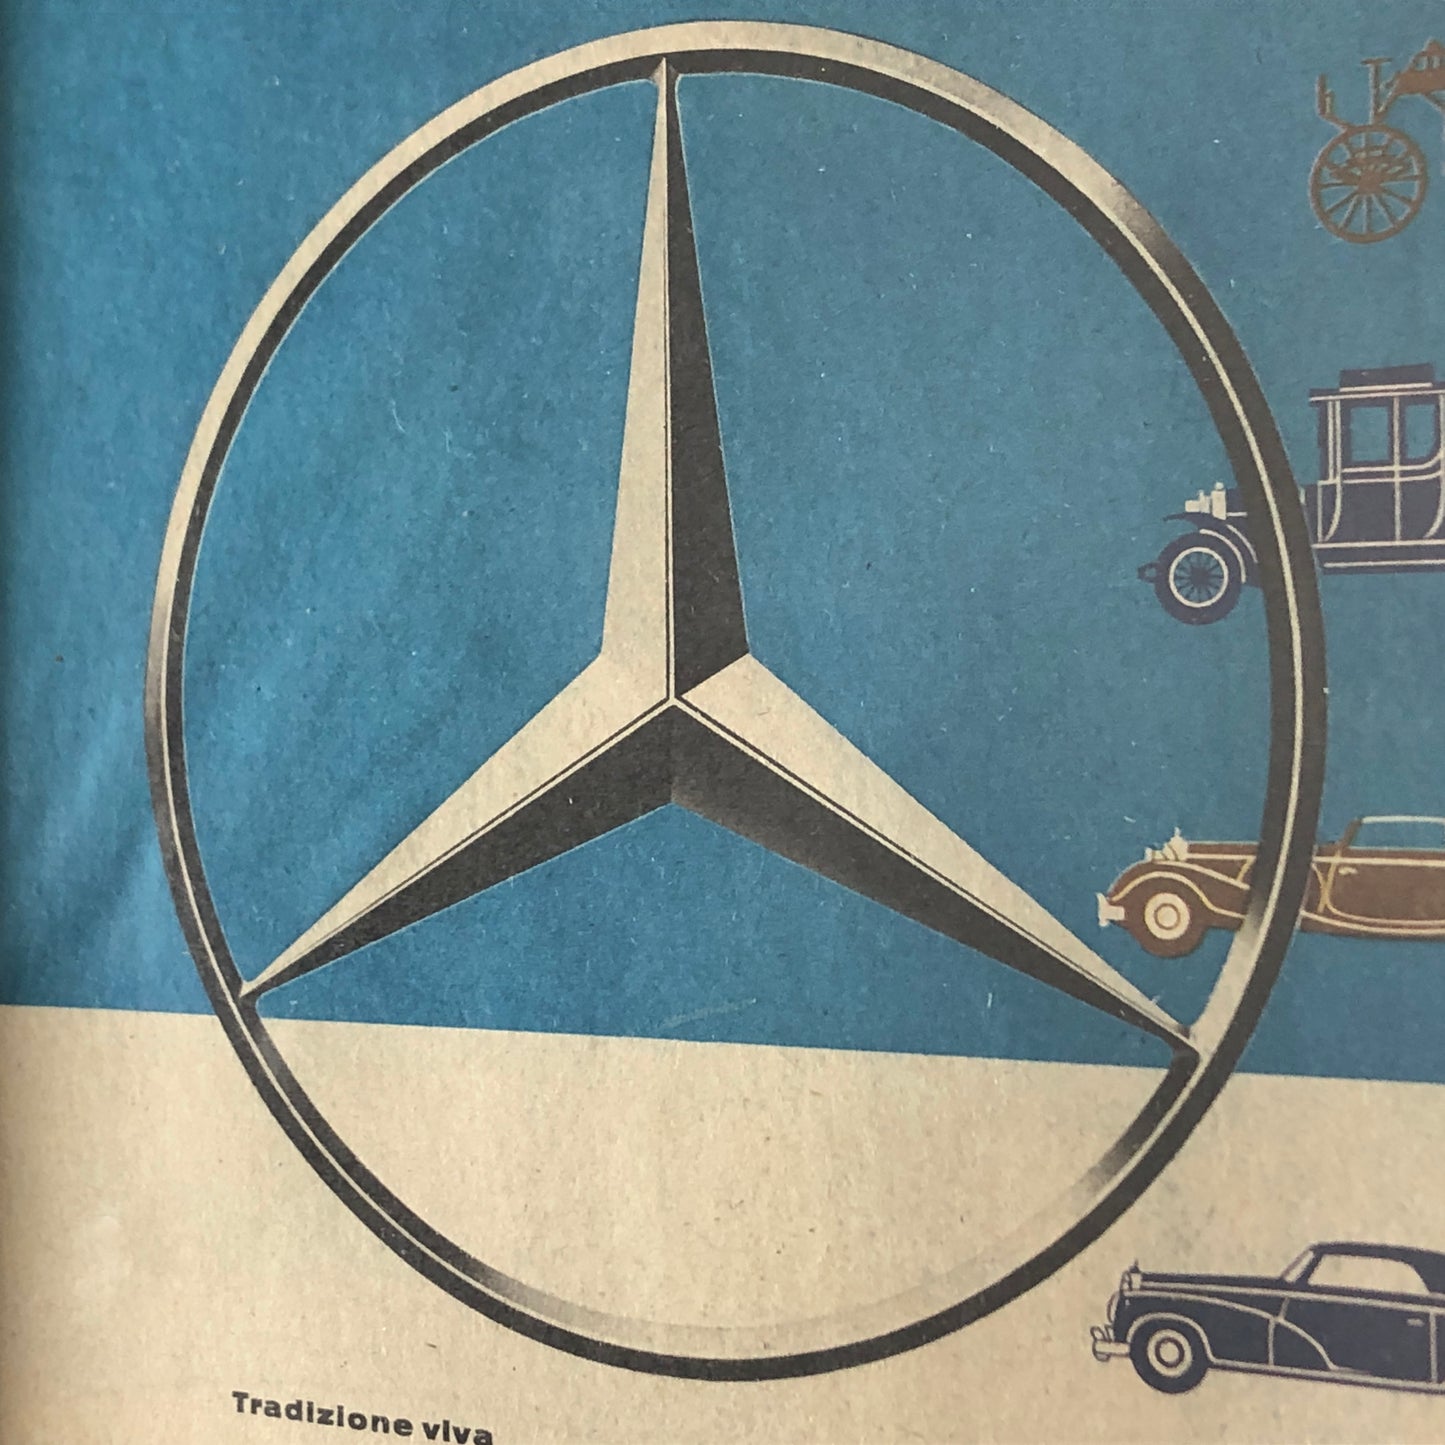 Mercedes-Benz, Advertising Year 1960 Tradizione Viva Mercedes-Benz with Caption in Italian